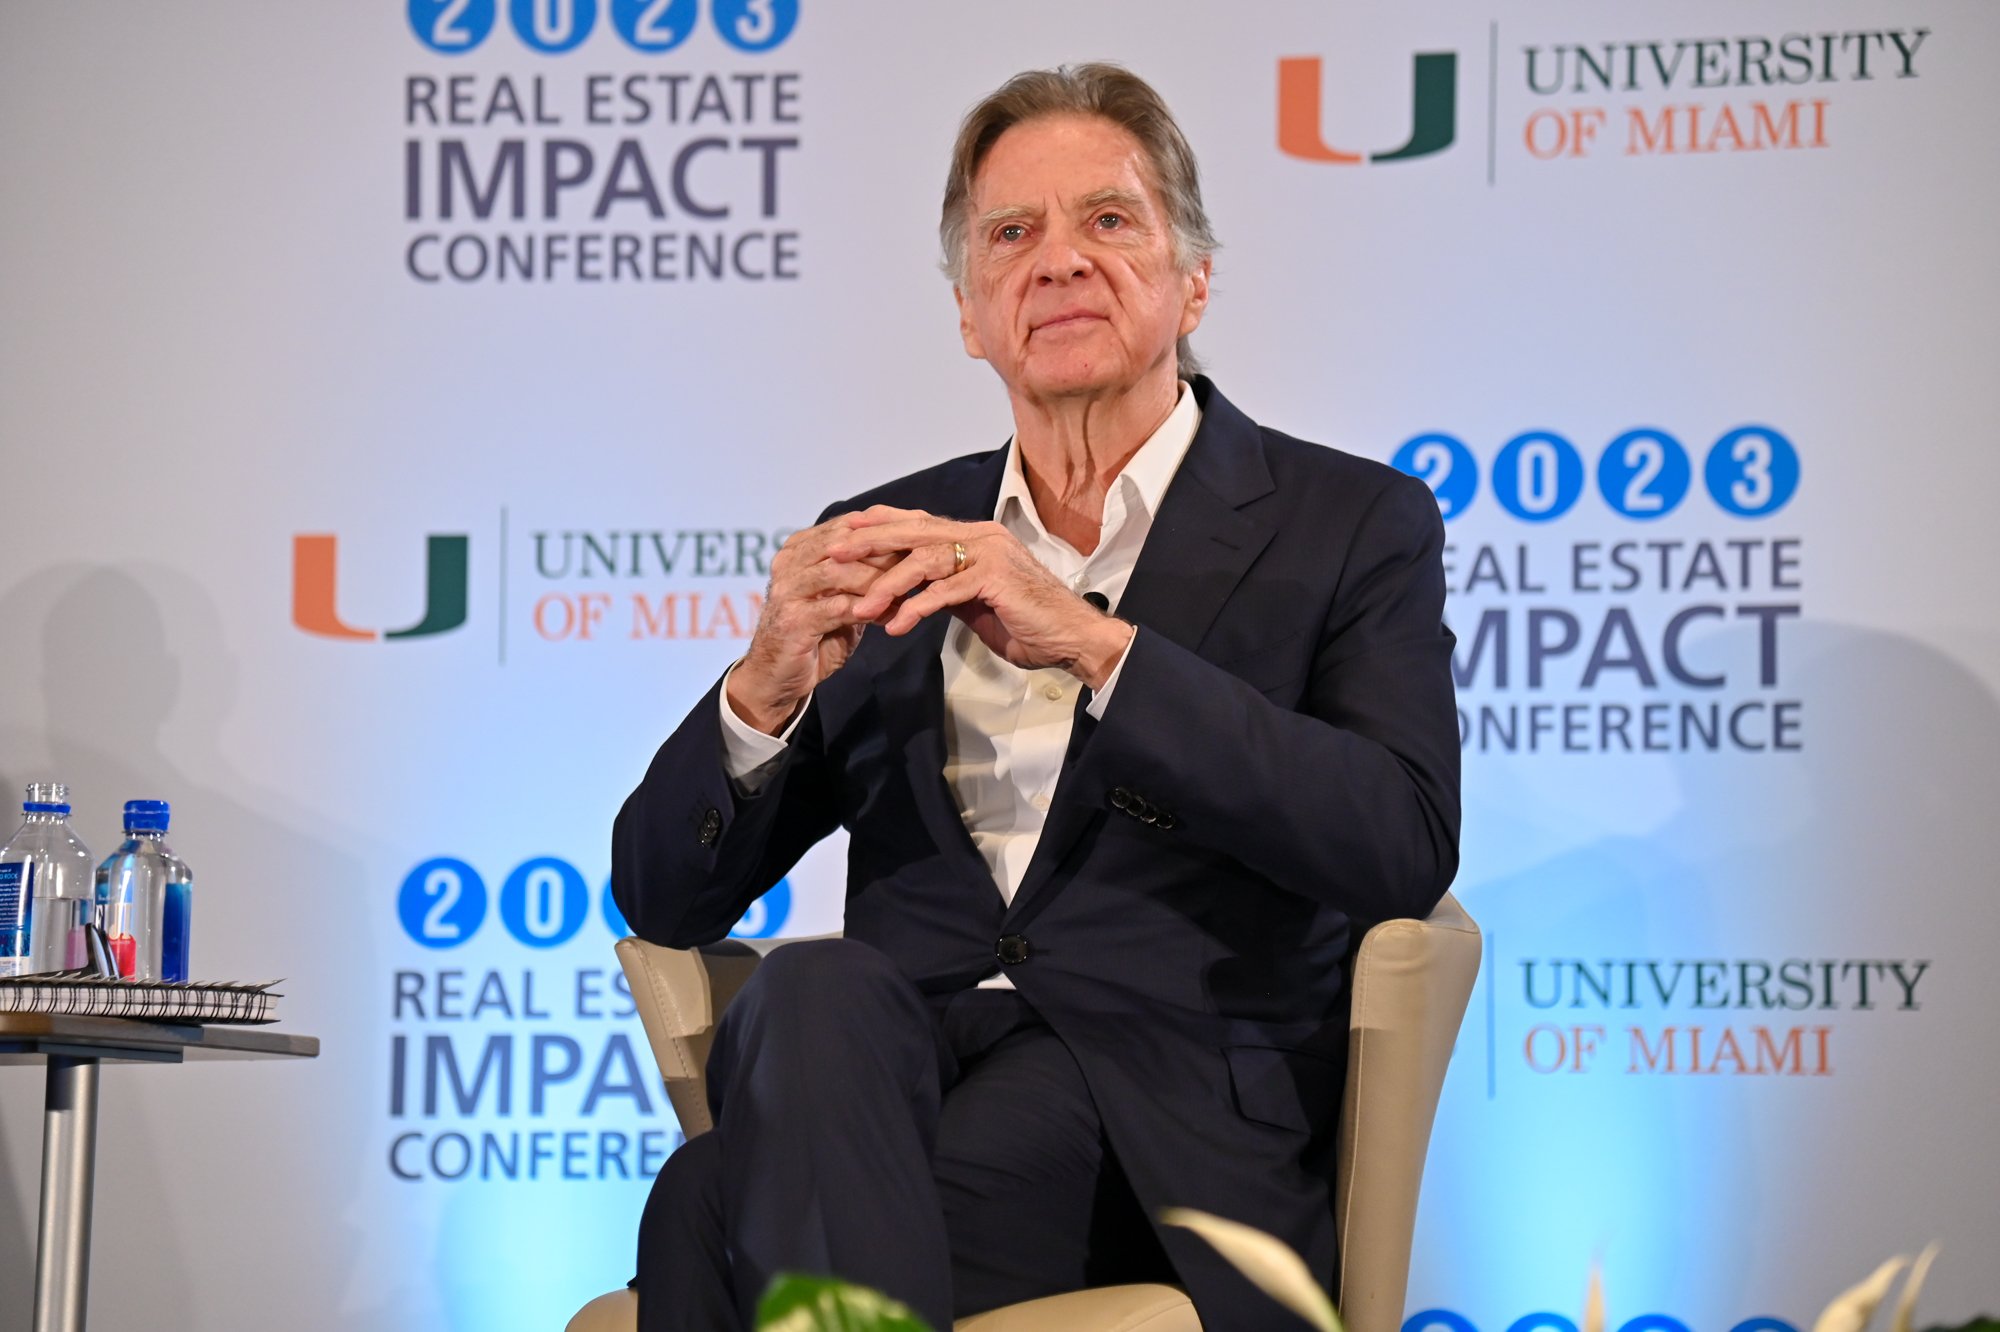 University of Miami Real Estate Impact Conference 2023 The Largest Edition Yet As Real Estate Leaders Discuss The State of Miami Real Estate 388.jpg